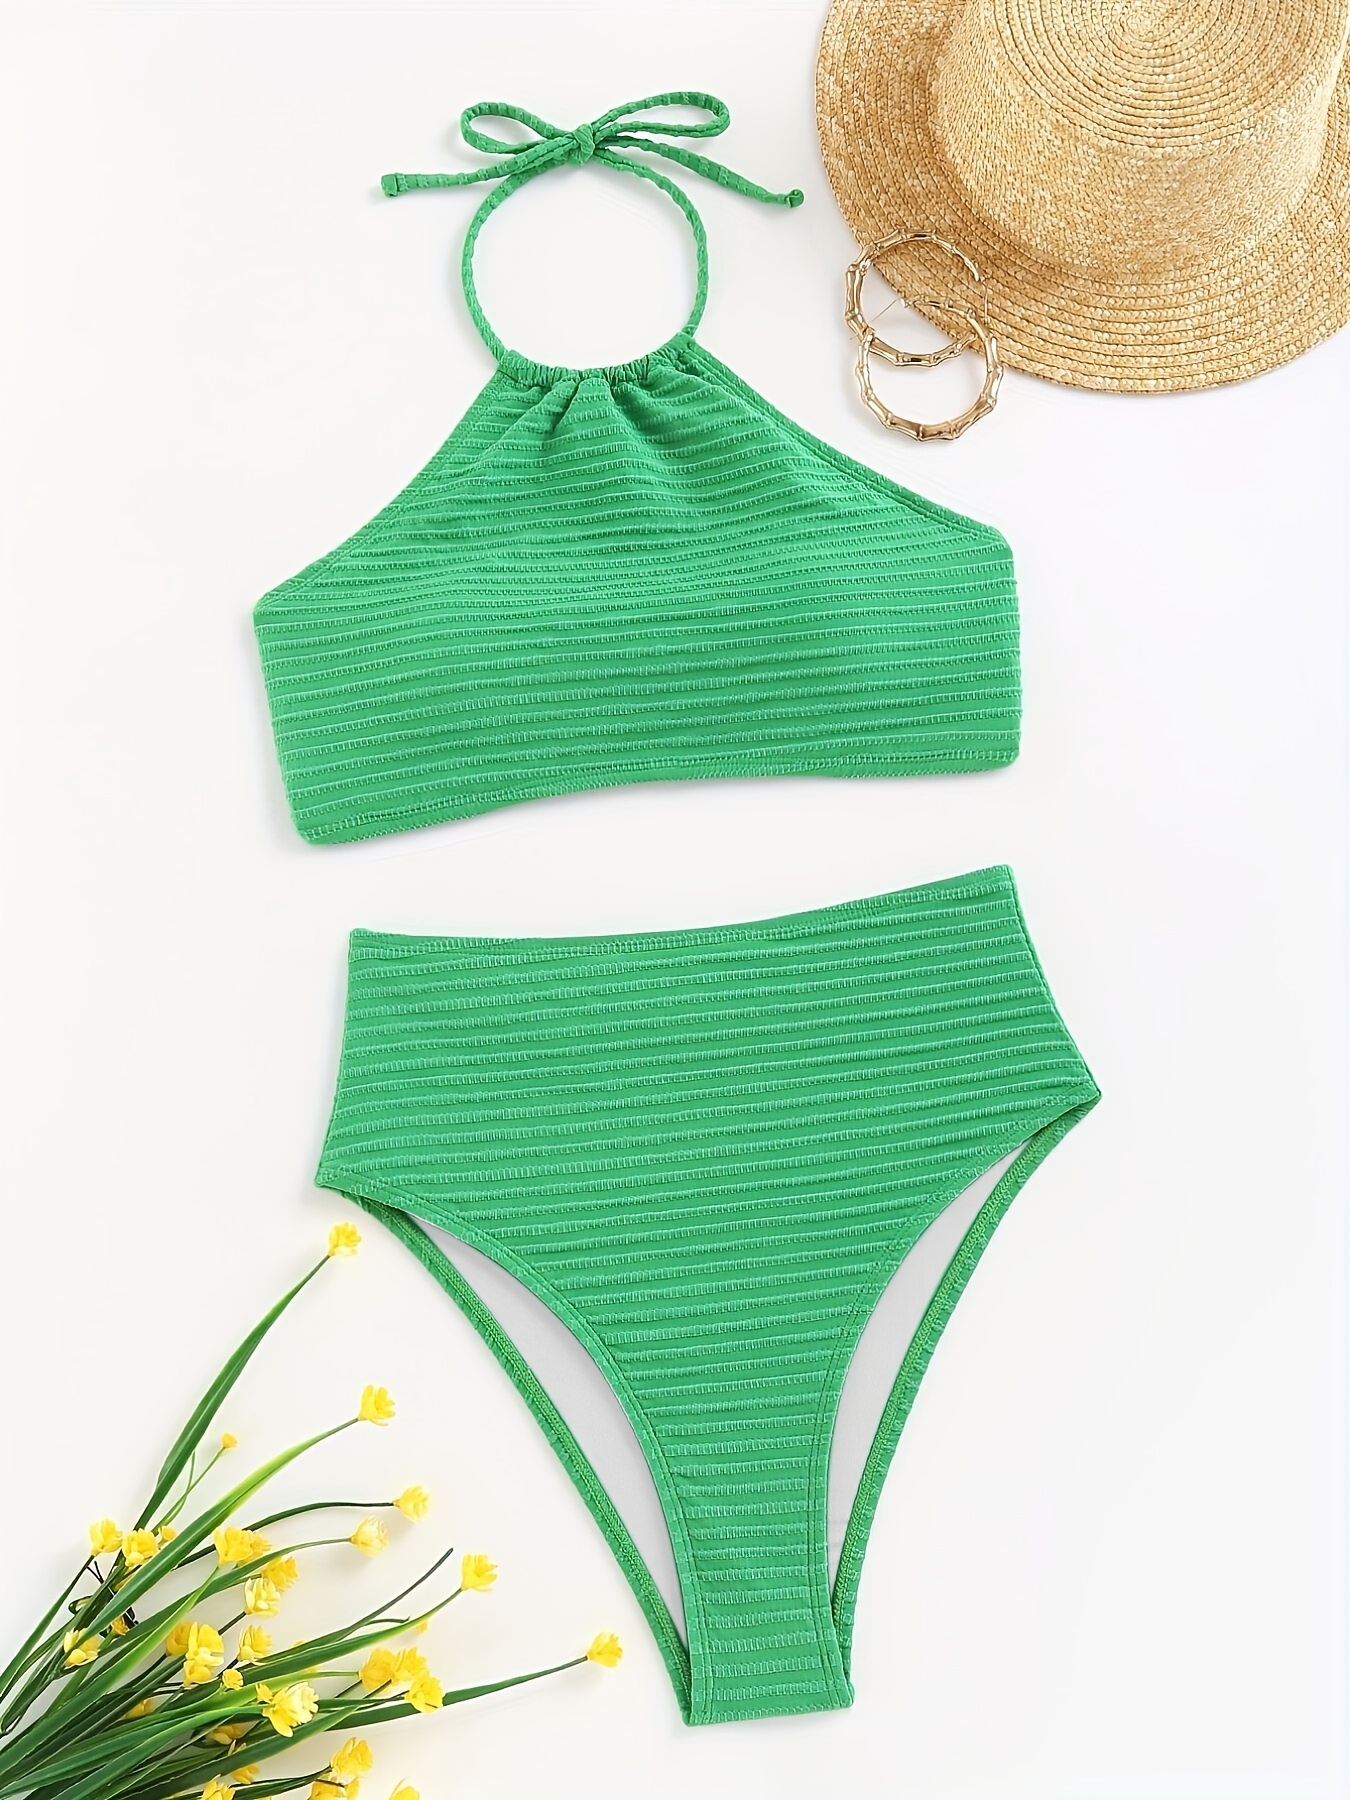 Halter Solid Green Ruched Texture 2 Piece Set Bikini, Tie Neck High Waist  Tummy Control Backless Stretchy Swimsuit For Beach Pool Bathing, Women's Swi